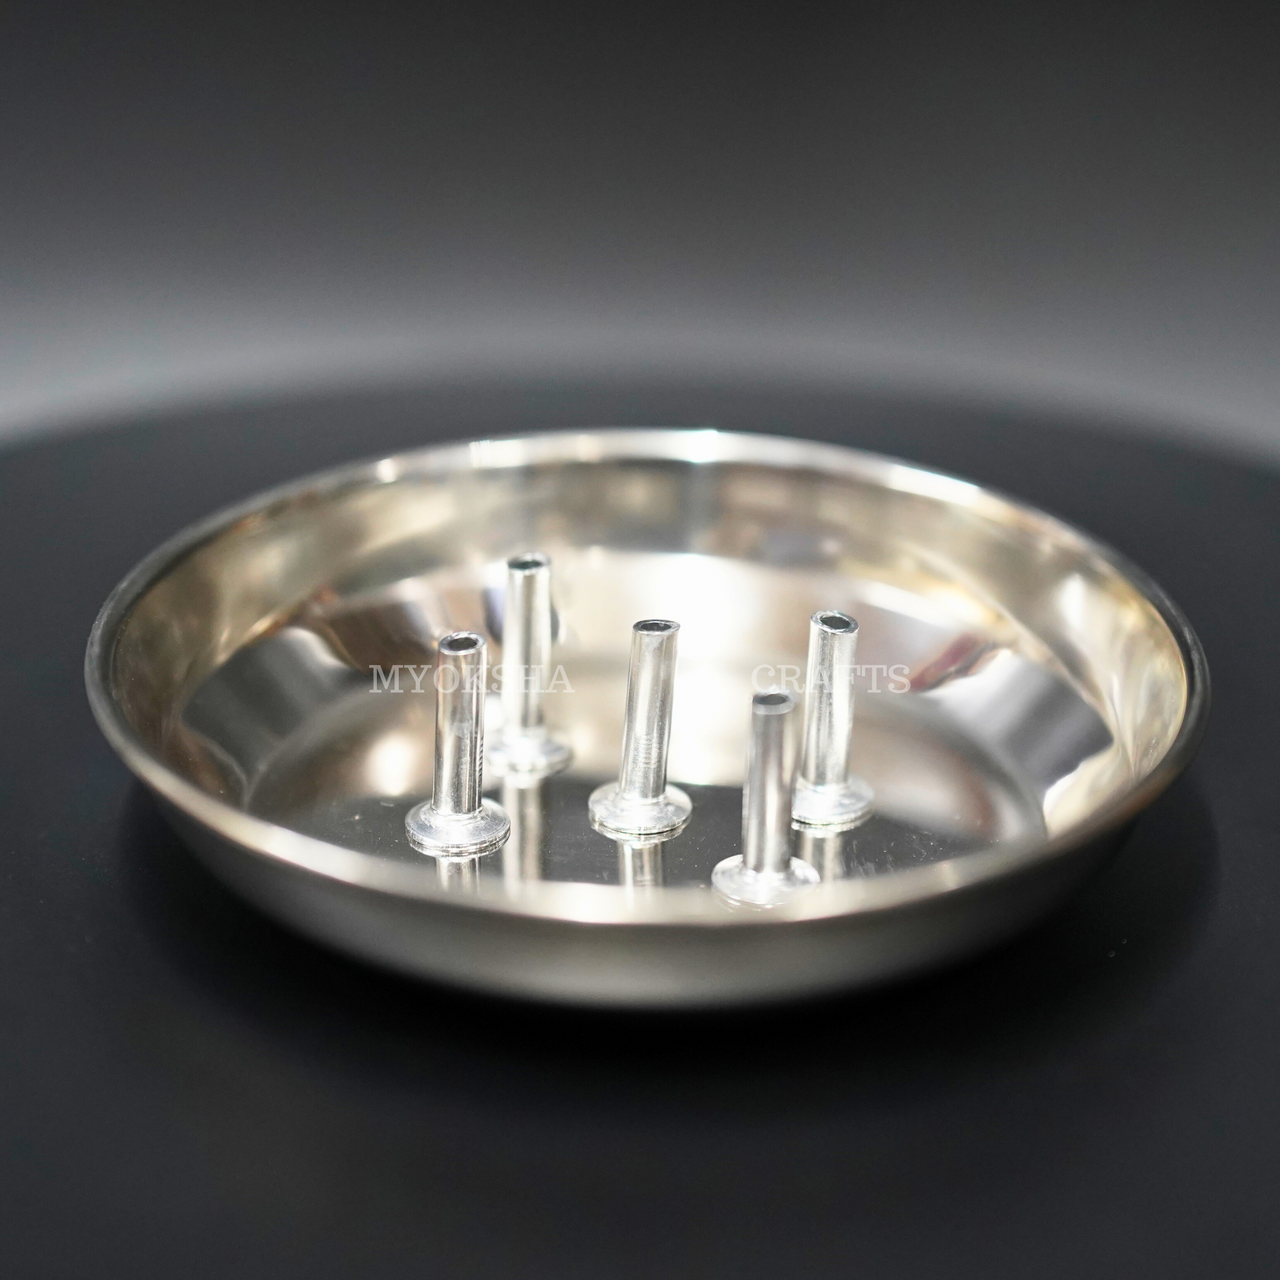 Stainless Steel Agardan Plate: Graceful Décor for Discerning Devotees - 1